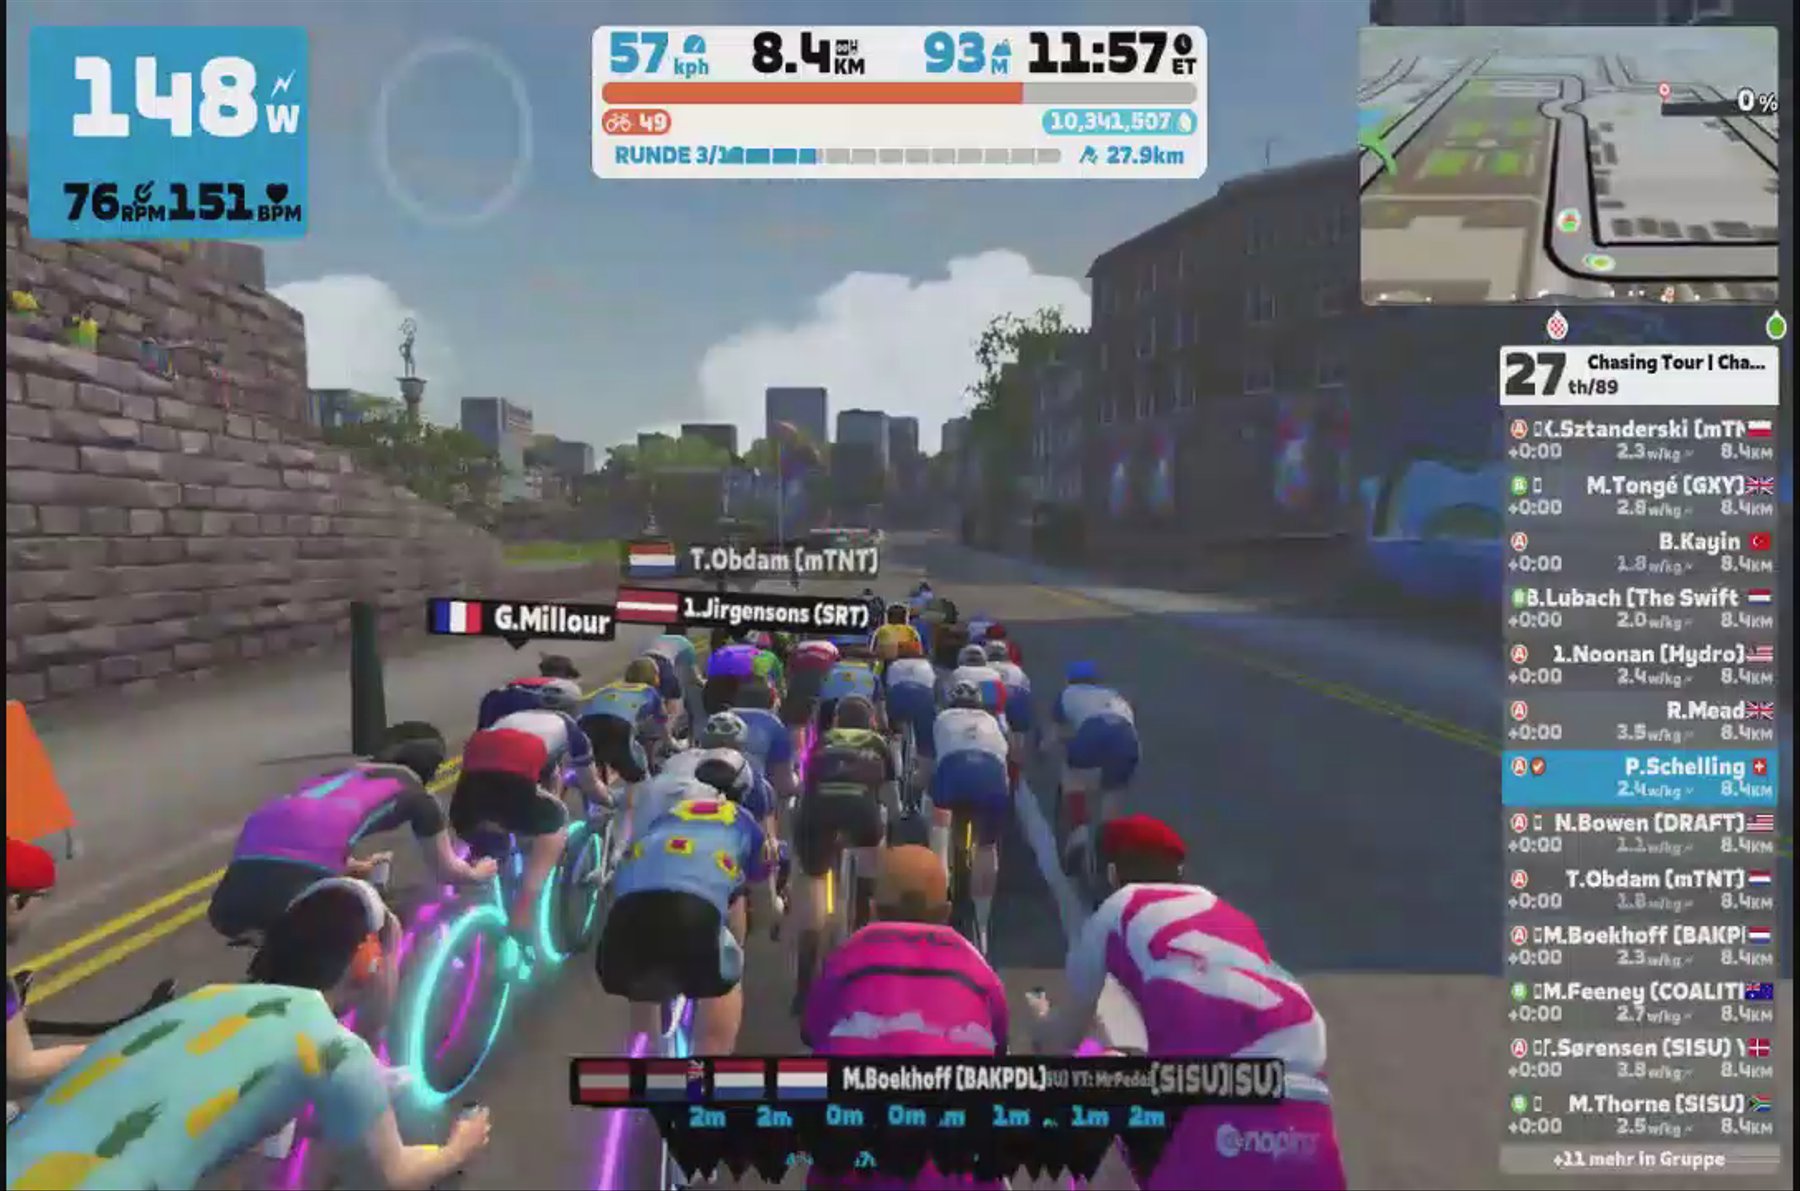 Zwift - Race: Chasing Tour | Chasing Wallonne (A) on Glasgow Crit Circuit in Scotland